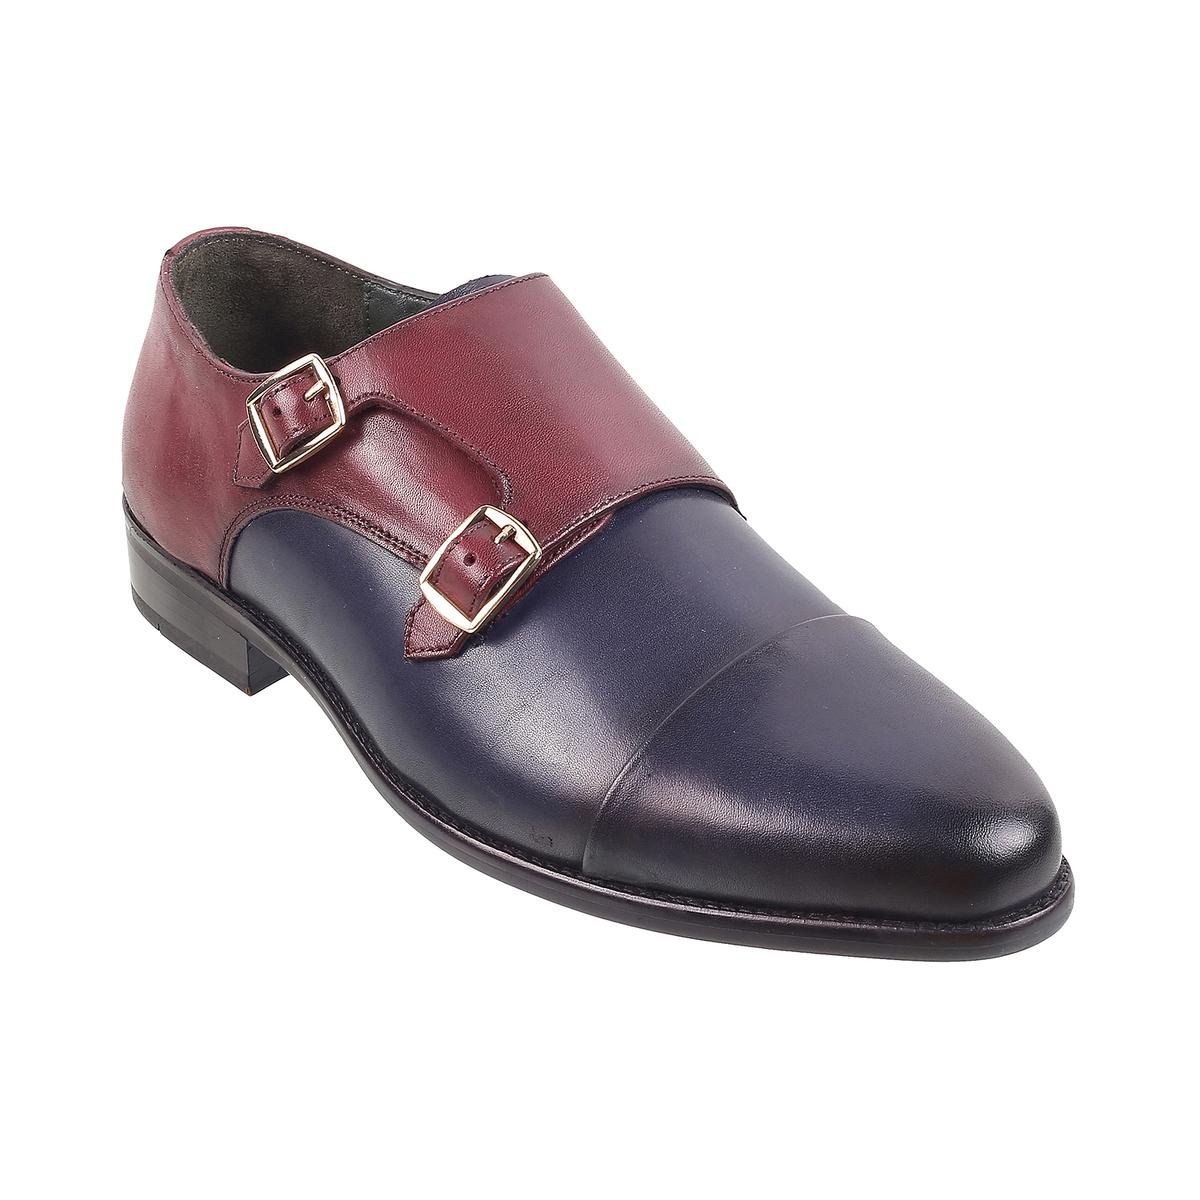 Mochi Shoes at Rs 2990/pair  Slip on Shoes for Men in